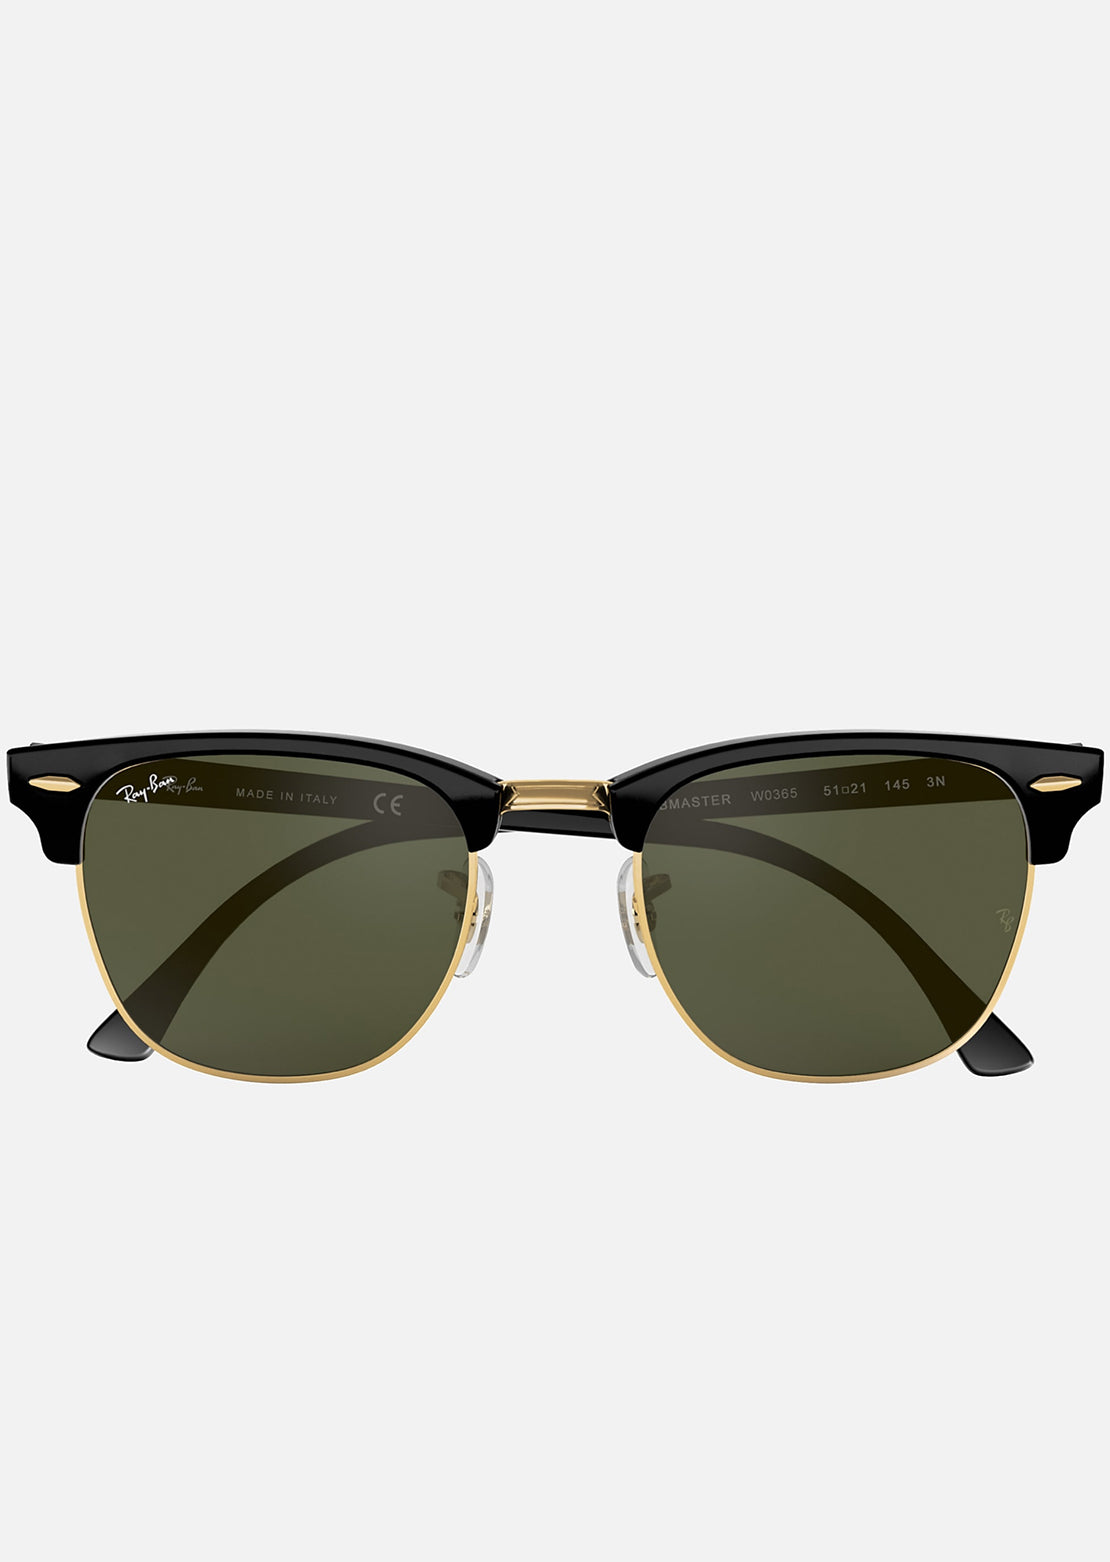 Ray-Ban Clubmaster Classic RB3016 Sunglasses Acetate Black/Green Classic G-15